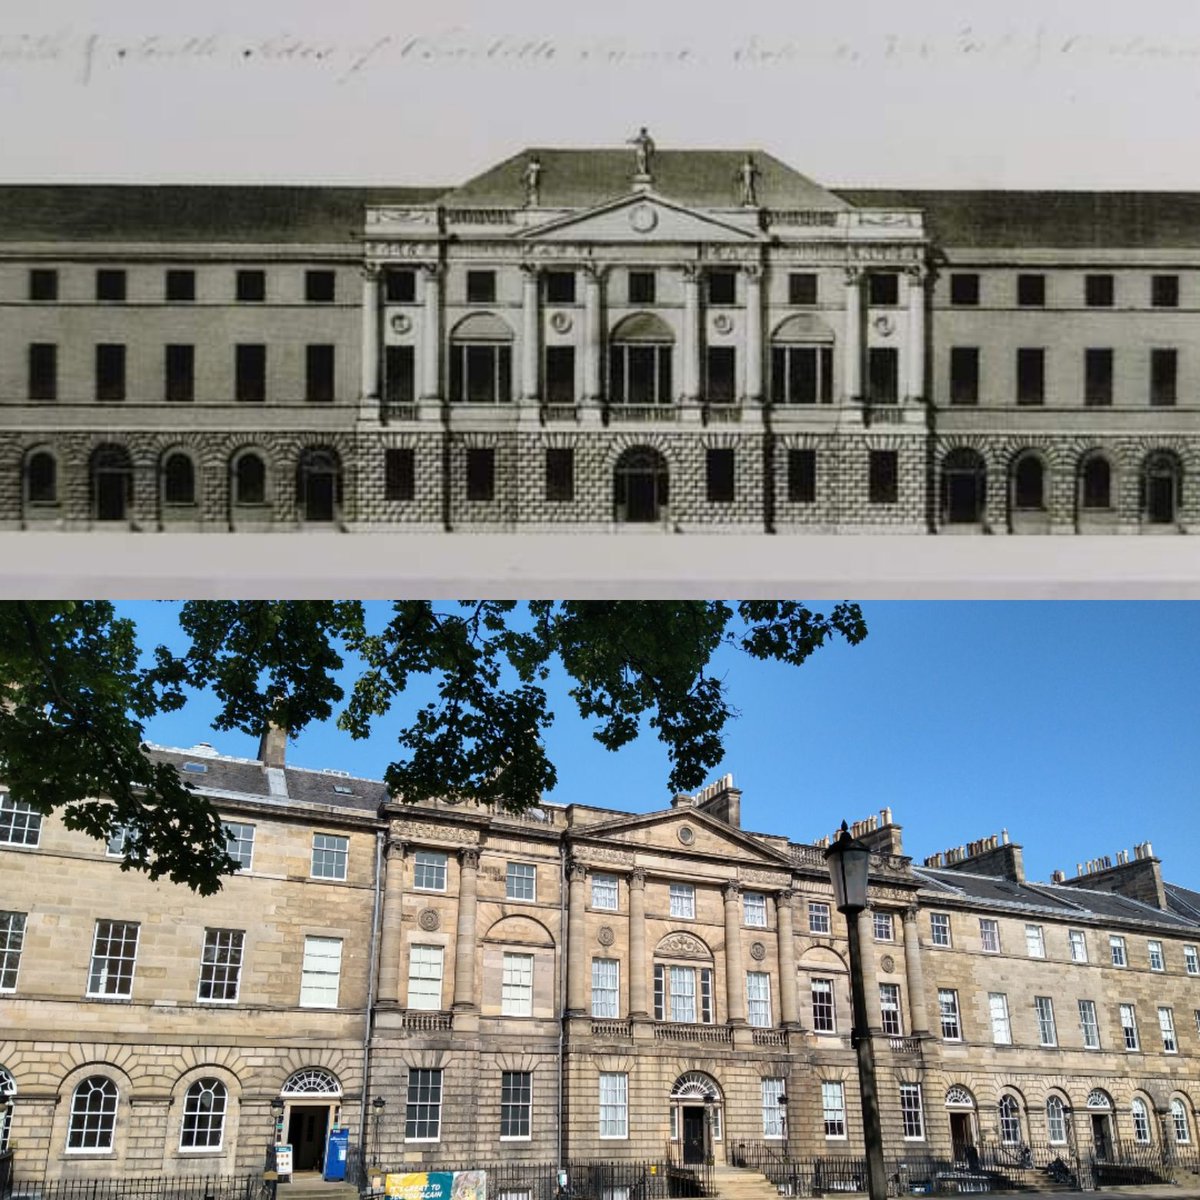 How it started (1790)

...

How it's going (2020) 👋

 #thegeorgianhouse #charlottesquare #robertadam